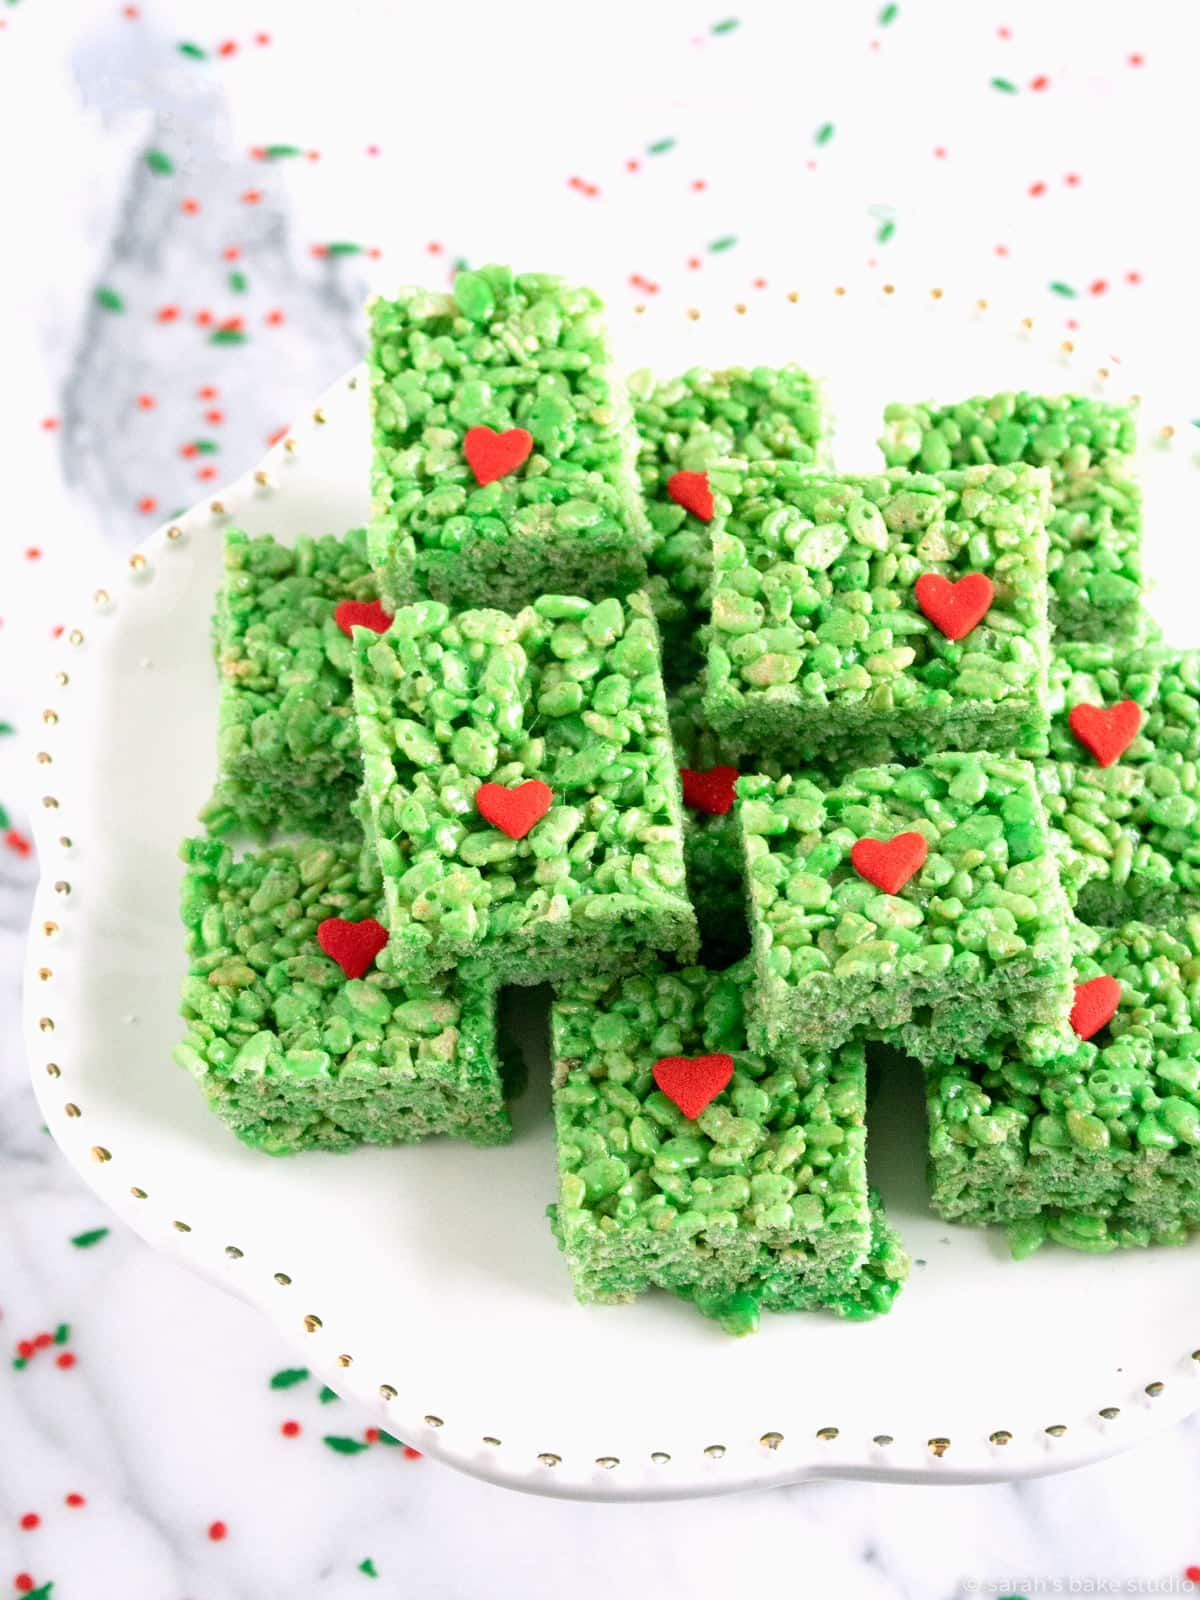 Grinch Rice Krispies Treats Topped with Red Heart-Shaped Candies